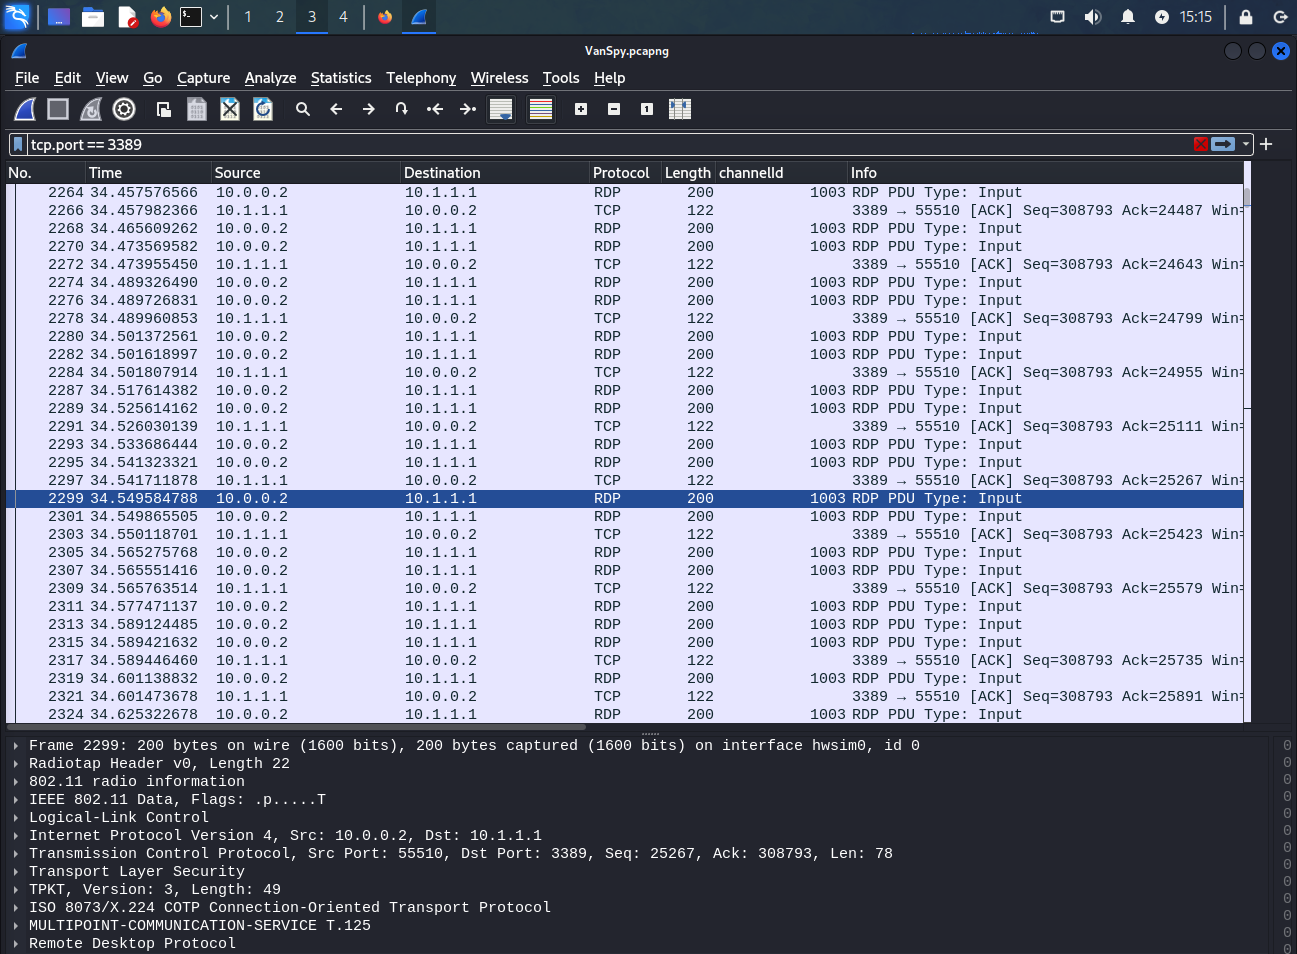 screenshot from wireshark showing unencrypted frames